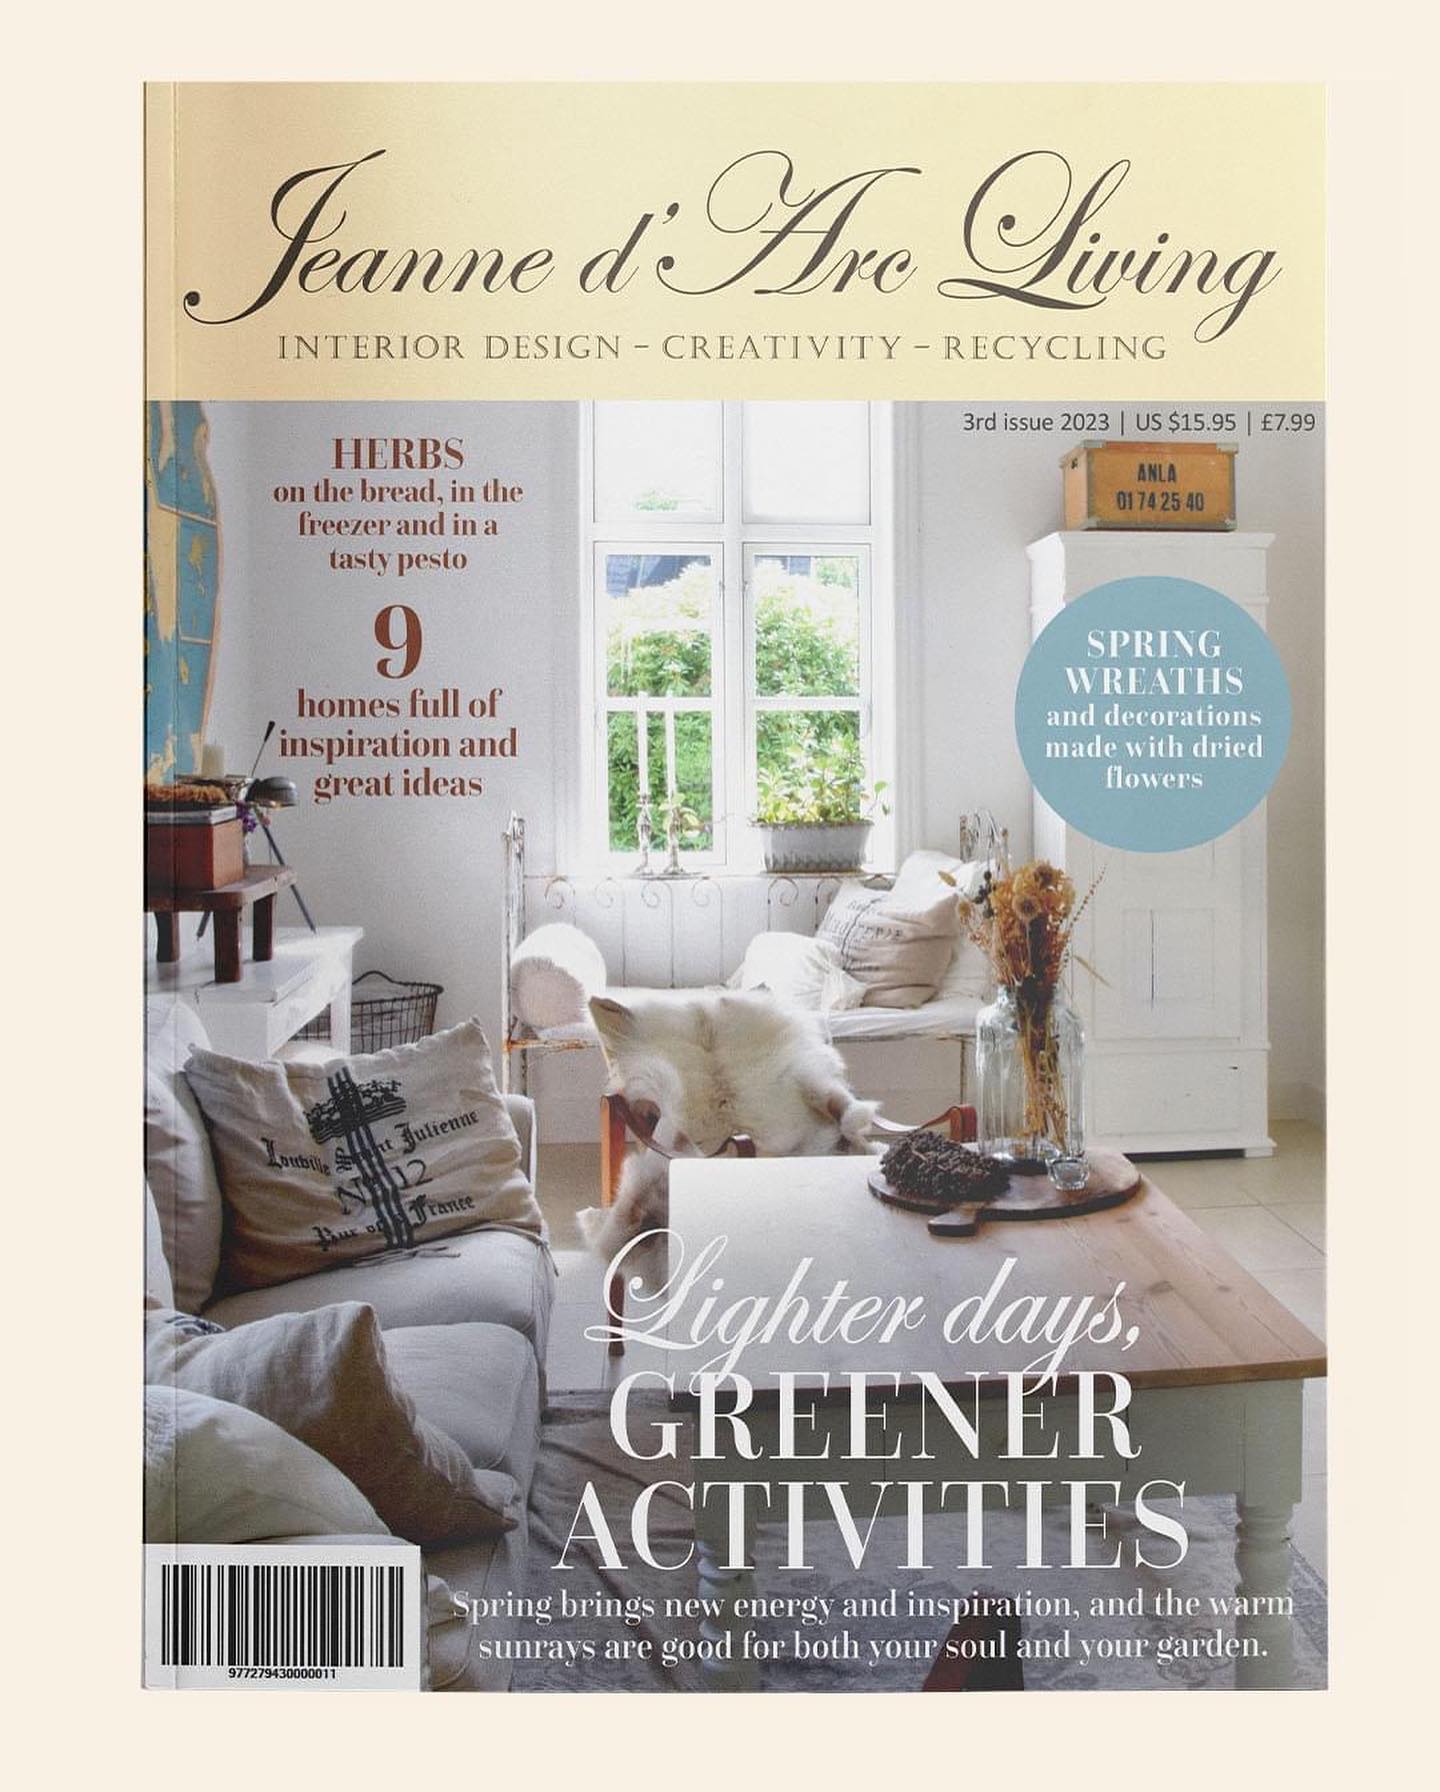 Jeanne d'Arc Living Magazine 2023 3rd Issue